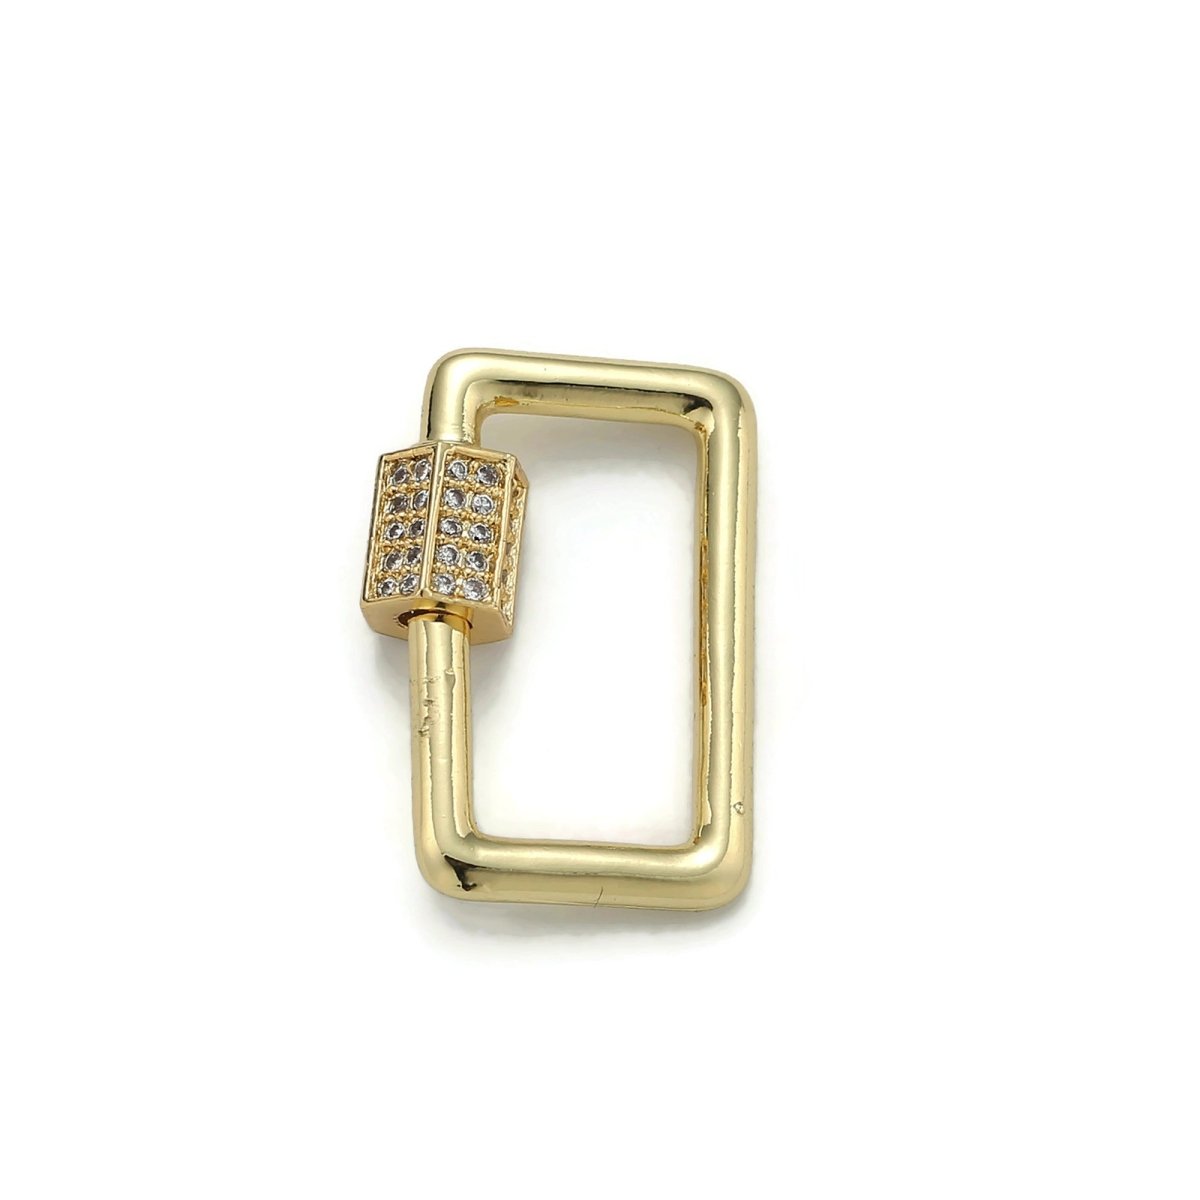 24K Gold-Plated Rectangle Carabiner, Hexagonal Screw Clasp with Pave Cubic Zirconia Rhinestones, Gold or Silver Option - DLUXCA